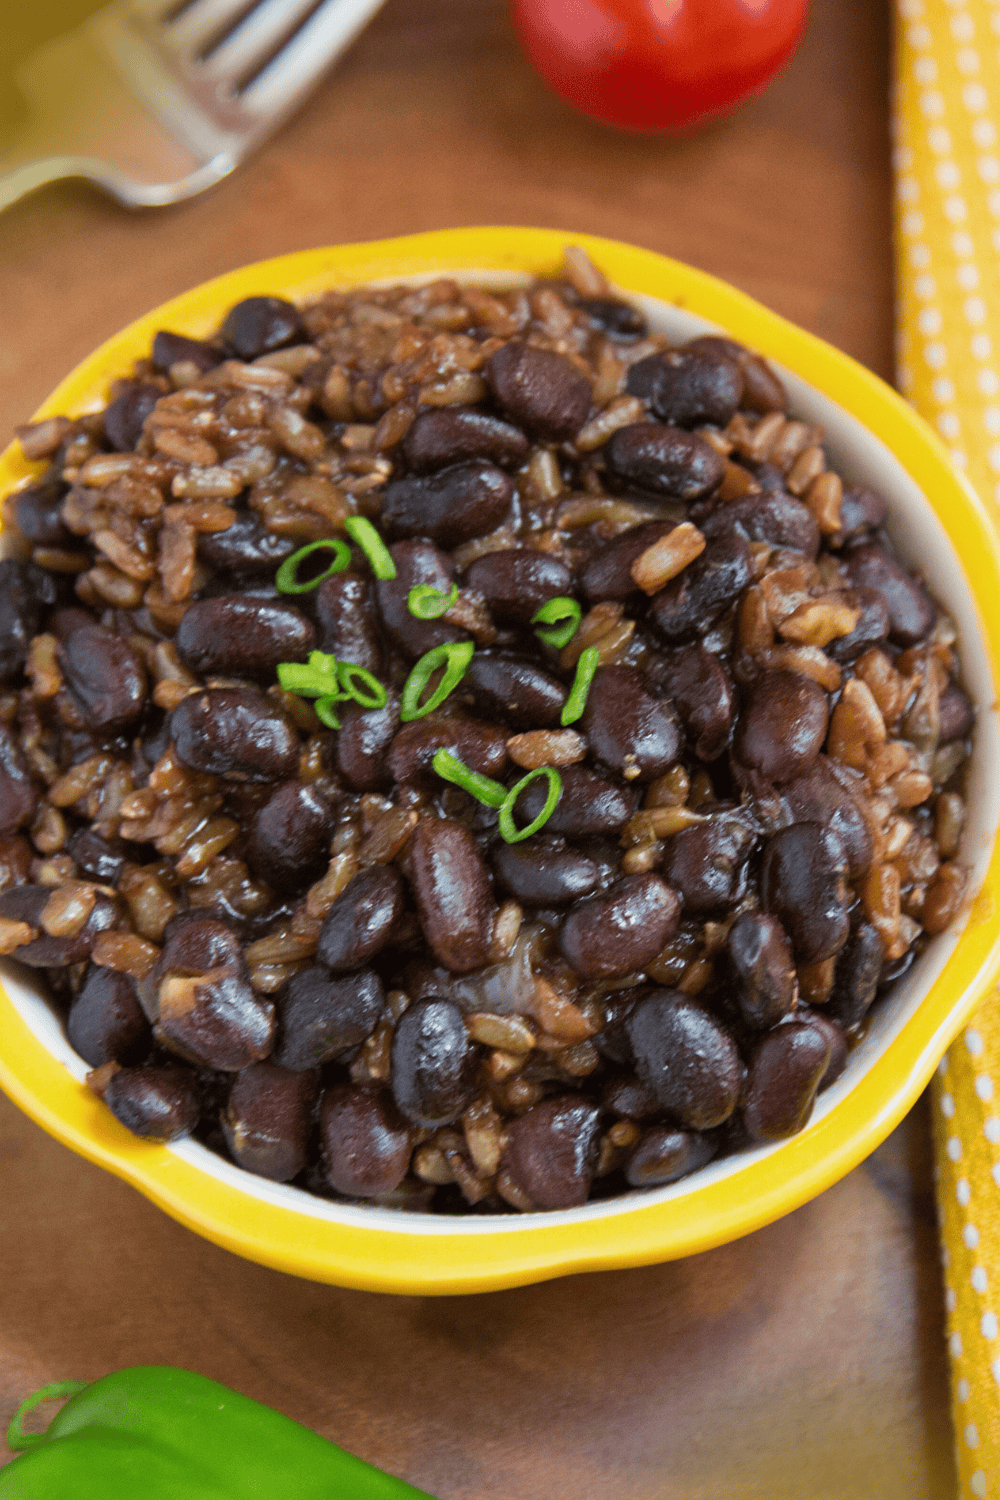 Top view of brown rice with black beans served